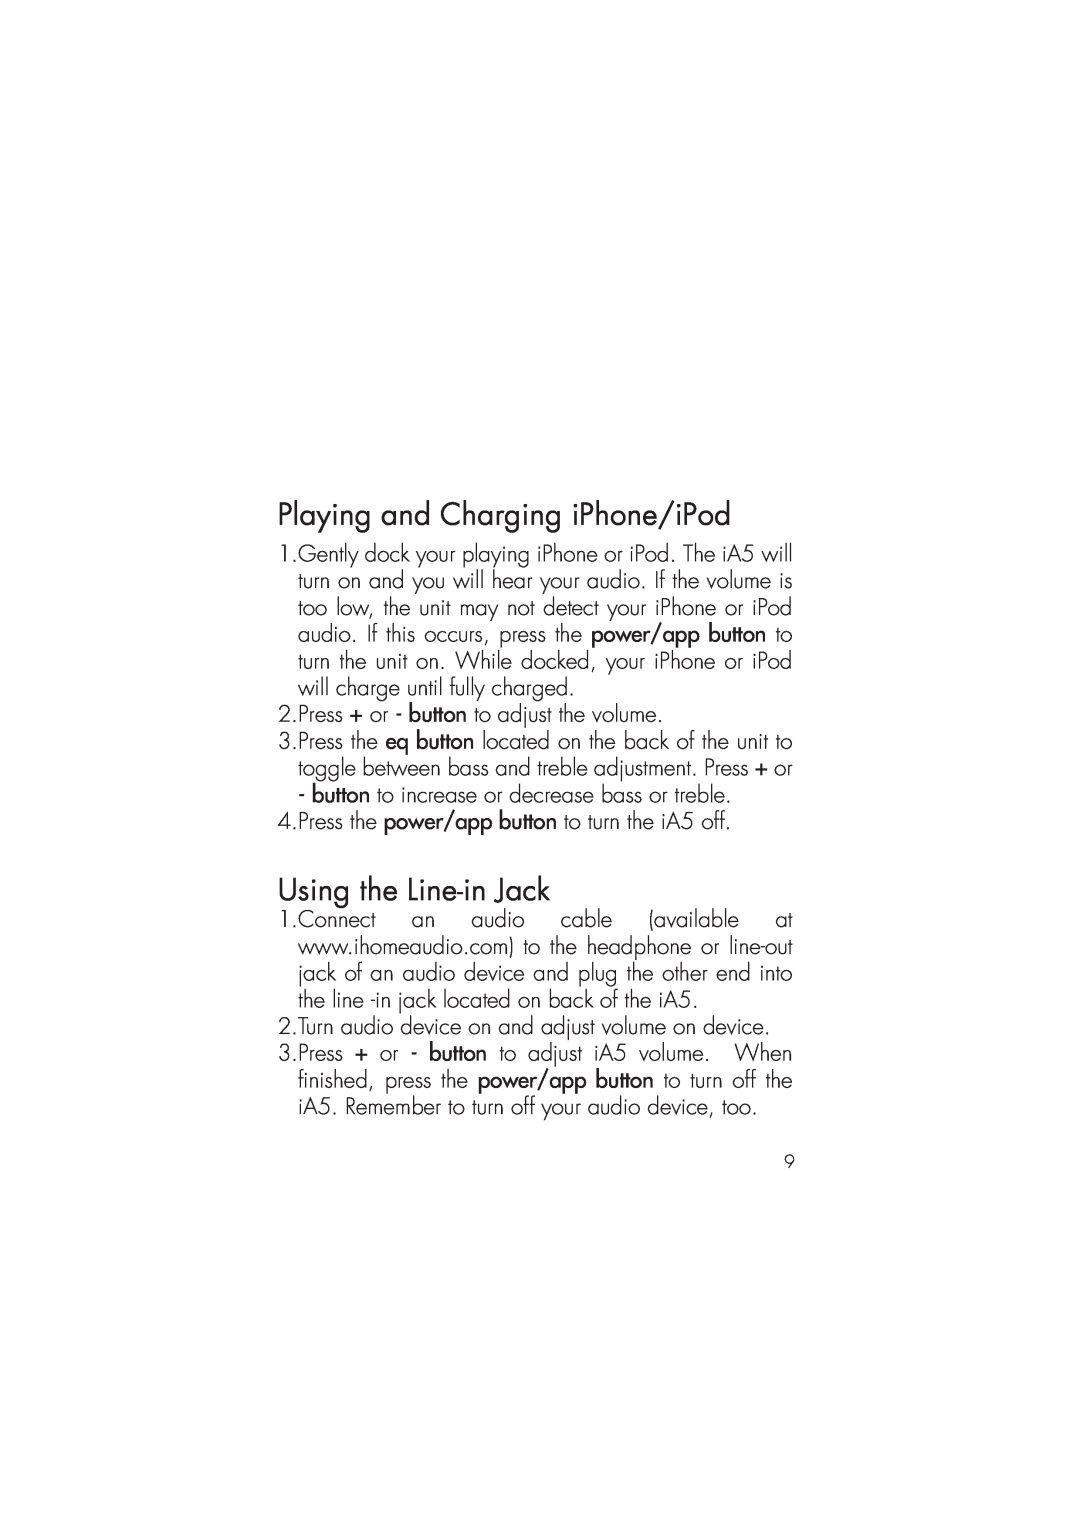 iHome ia5 instruction manual Playing and Charging iPhone/iPod, Using the Line-in Jack 